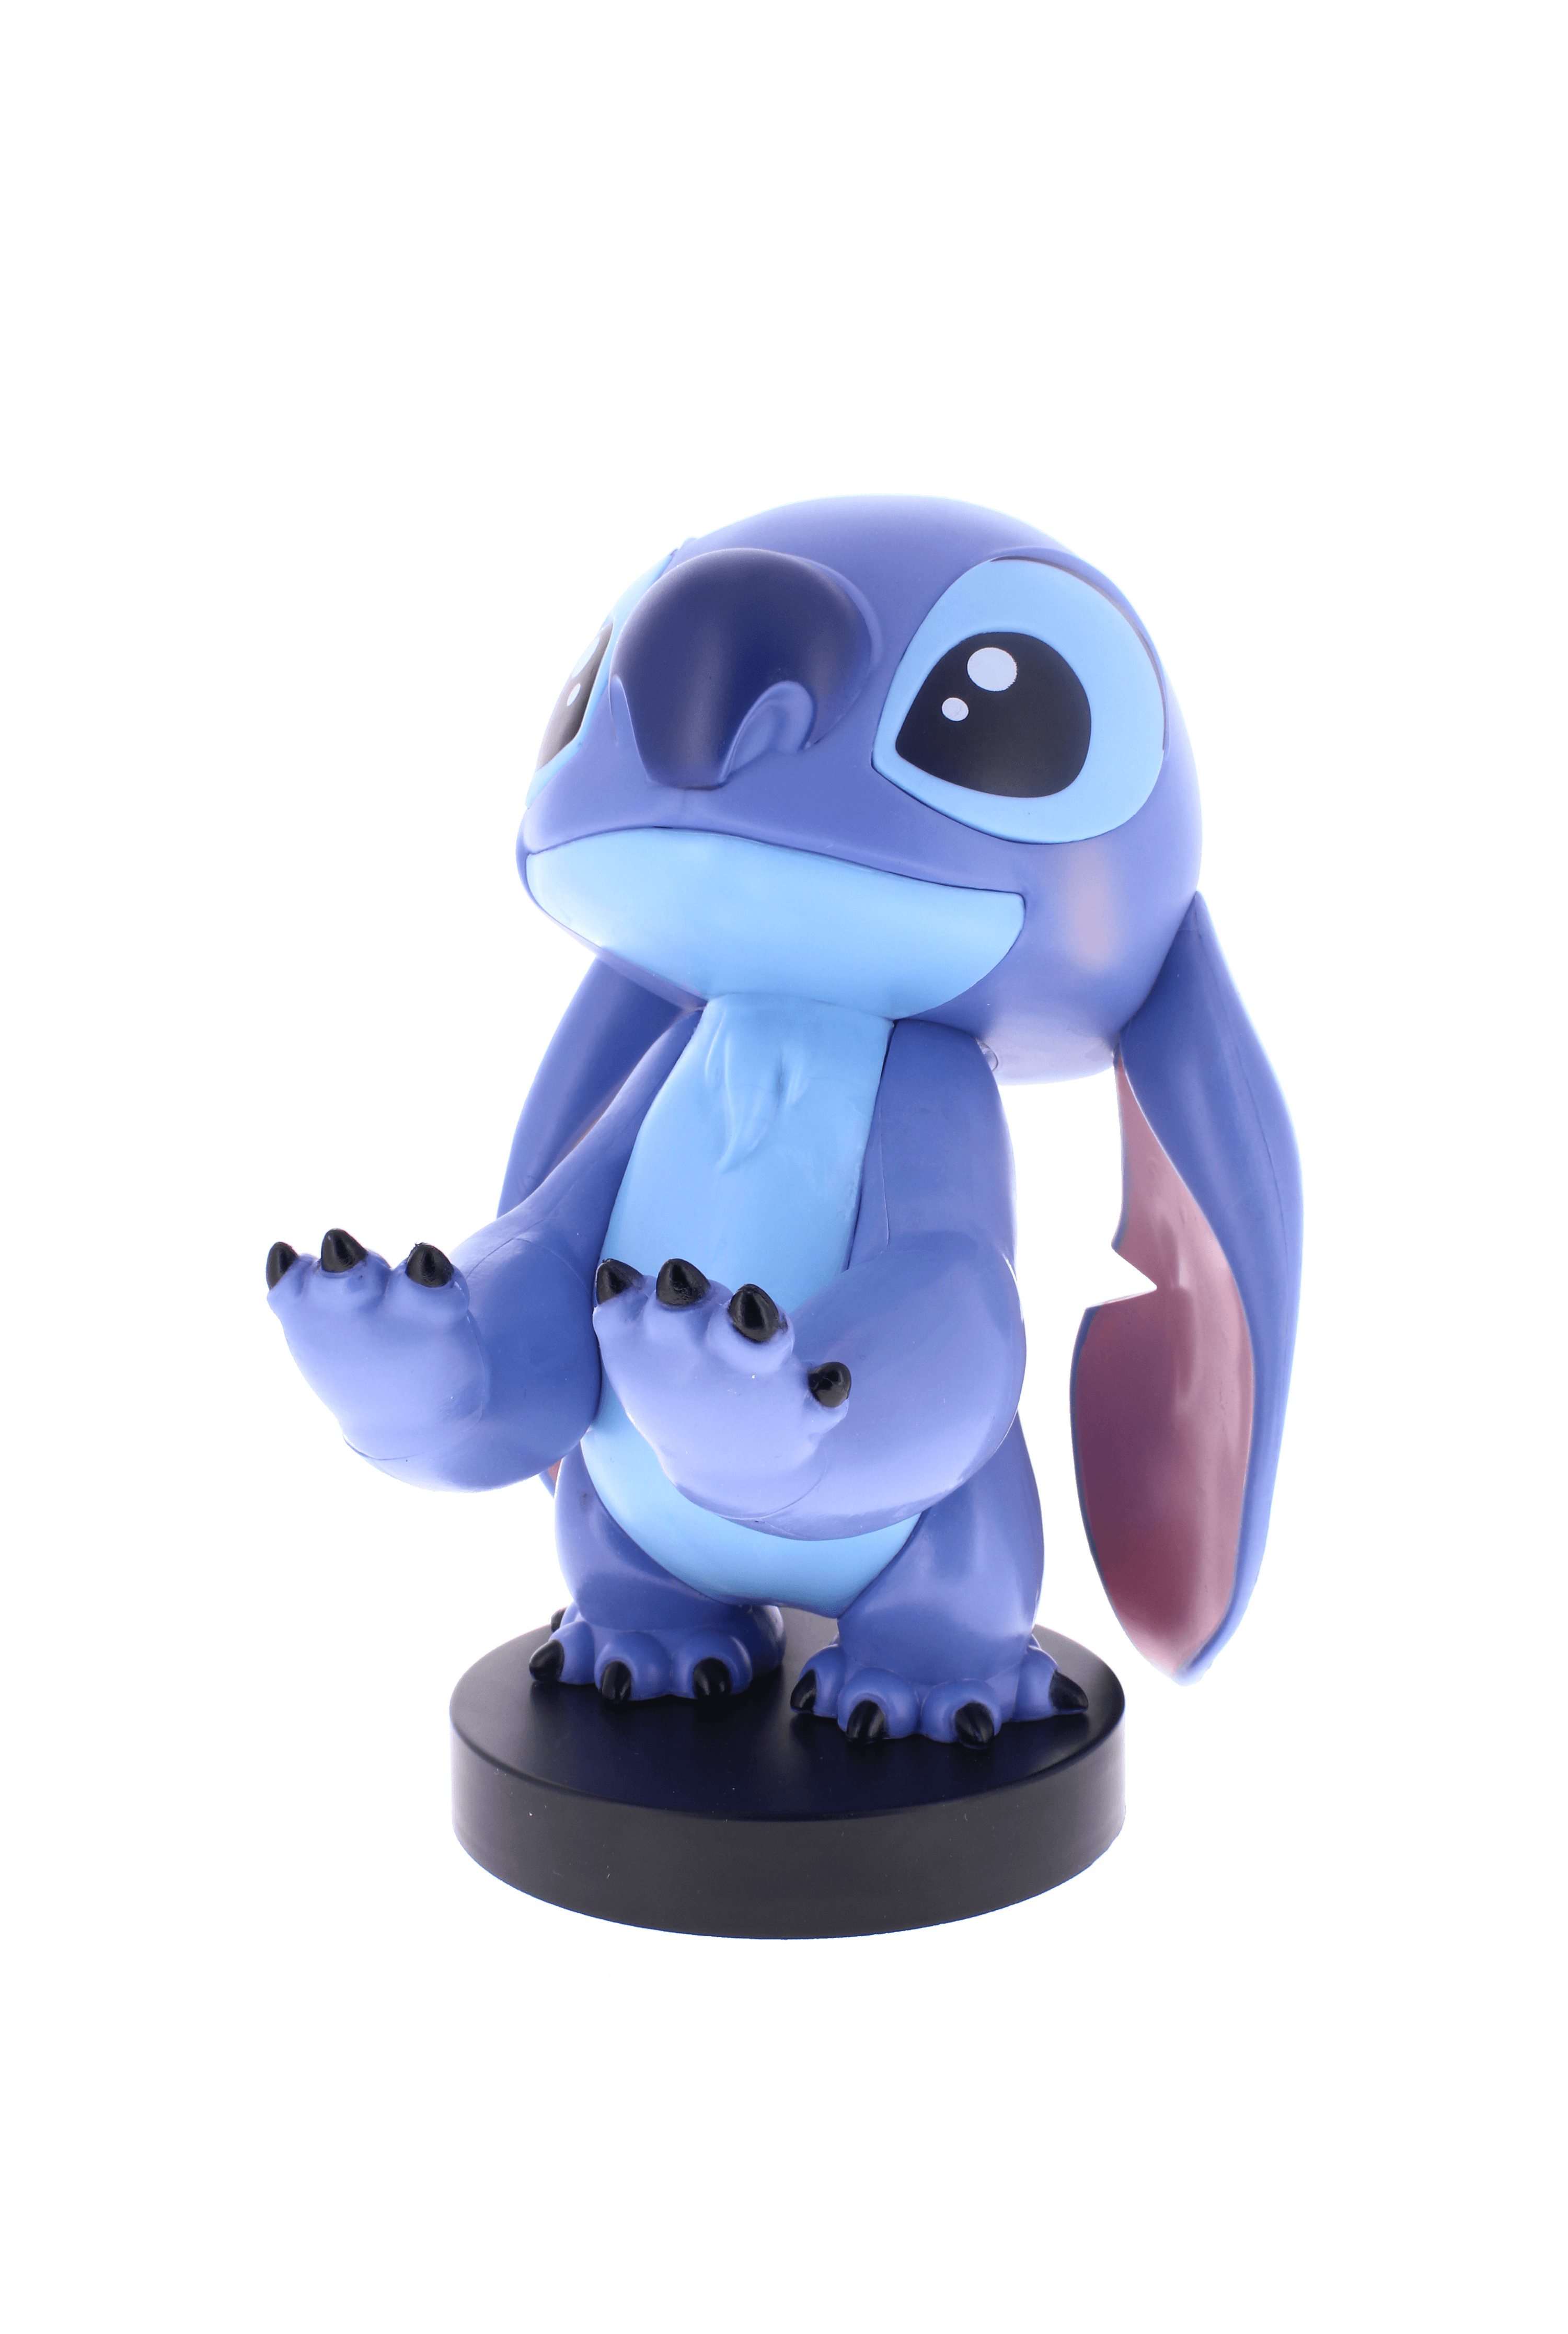 Cable Guys - Disney - Stitch - Phone & Controller Holder - The Card Vault